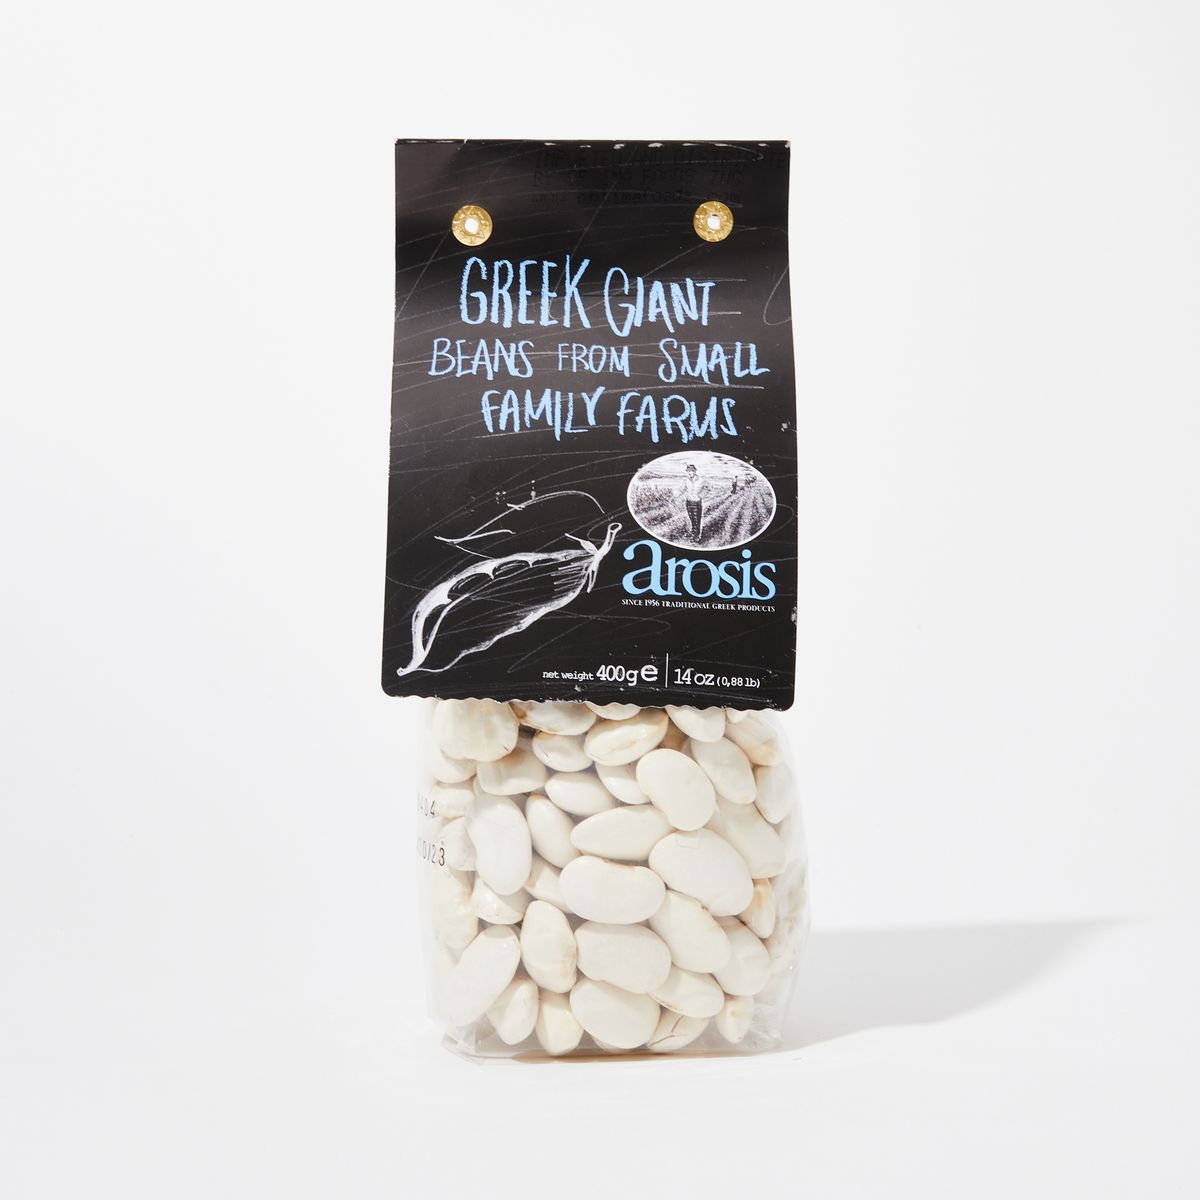 Clear bag of white gigante beans with a black label that reads "Greek Giant Beans from Small Family Farms"